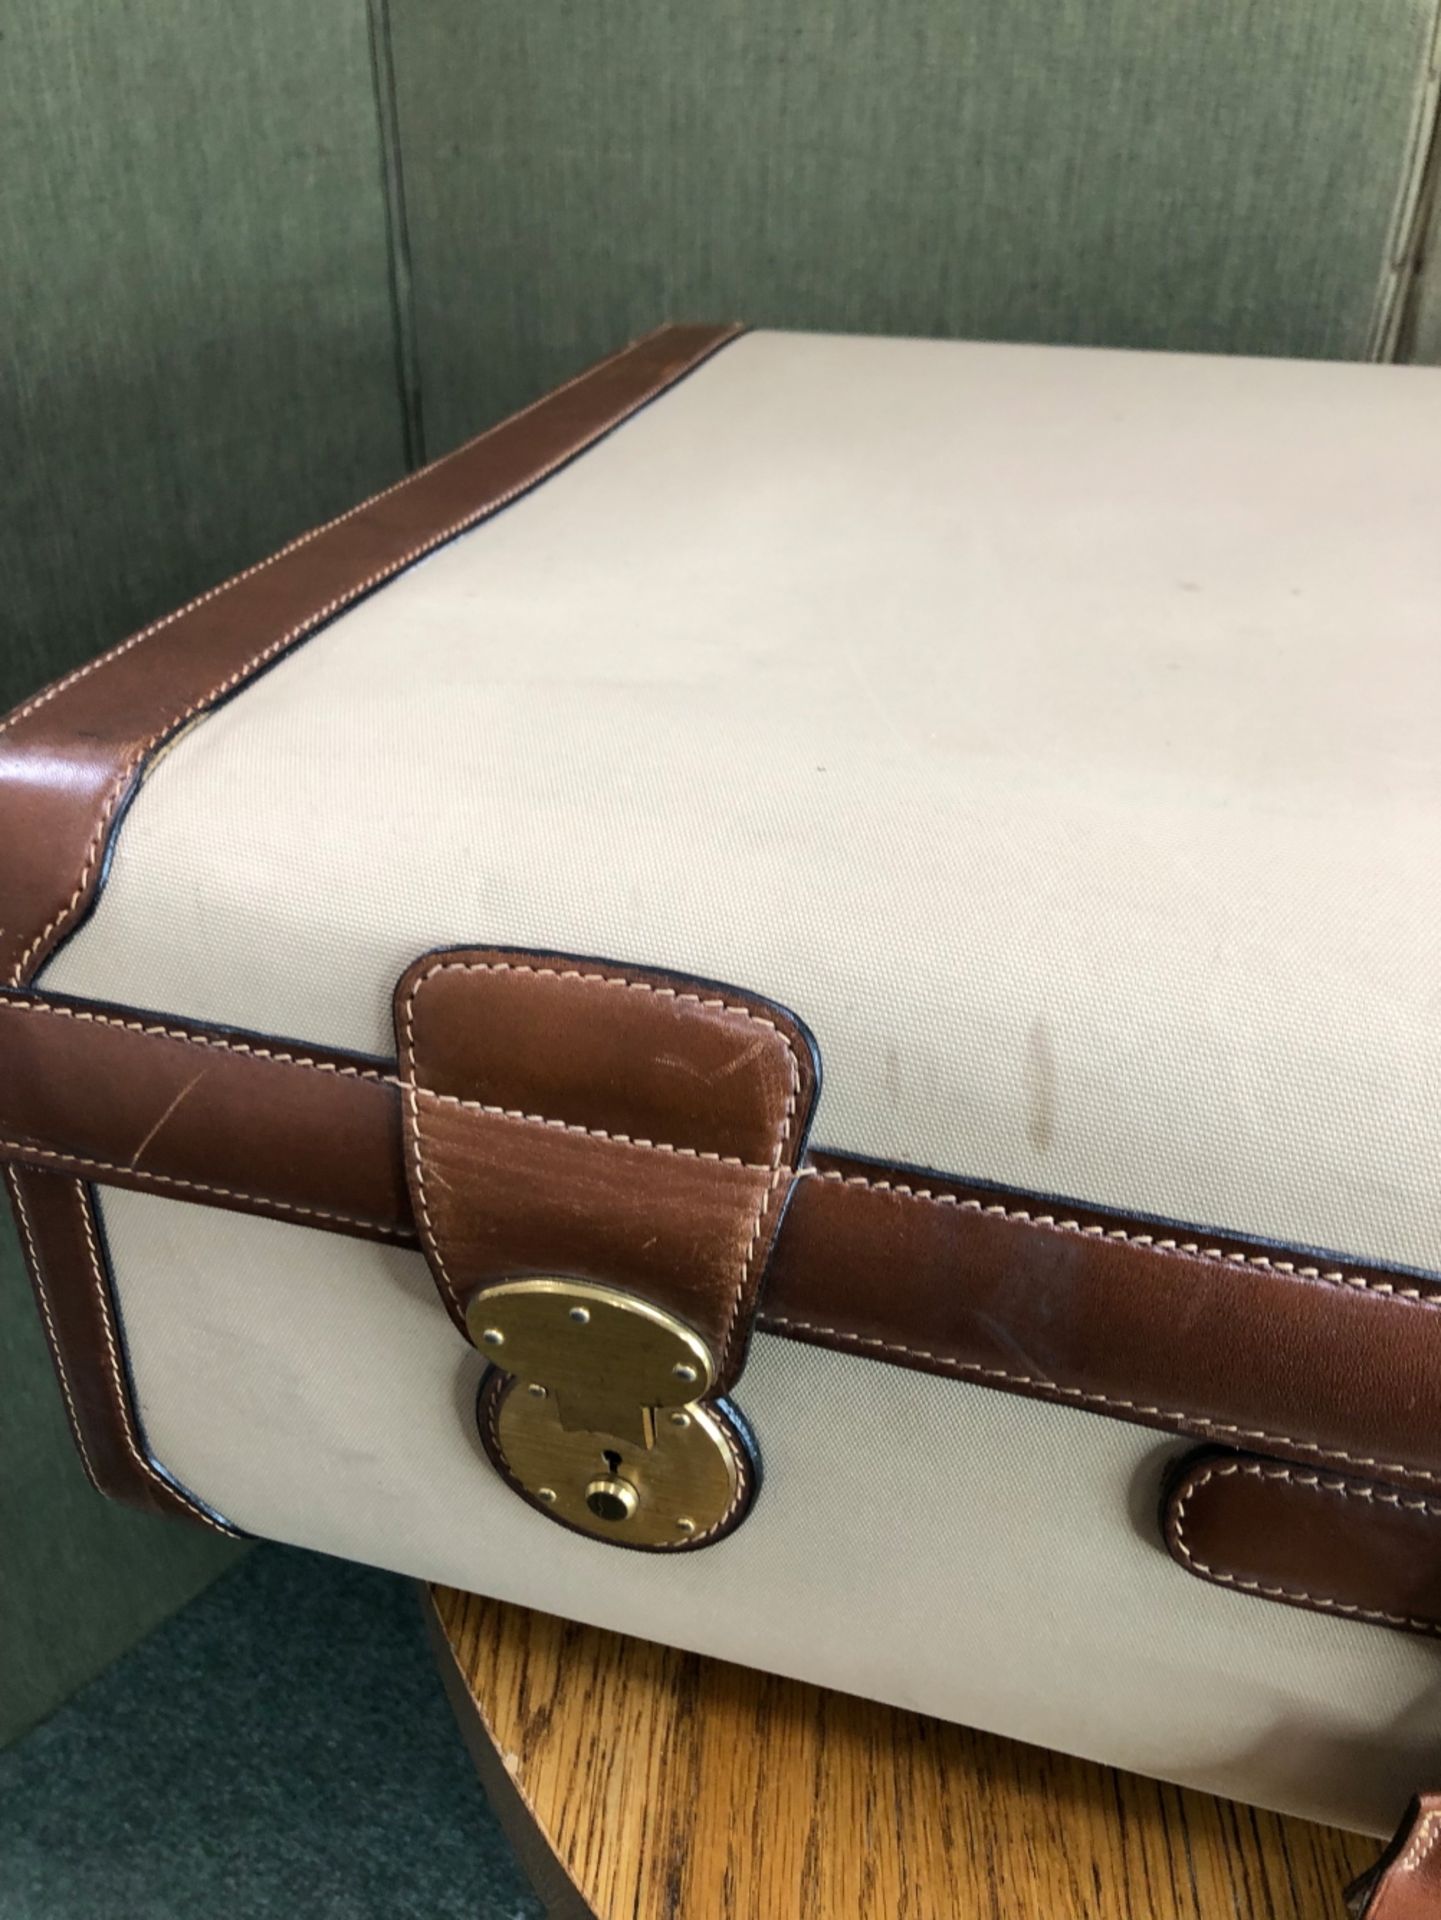 HARRODS VINTAGE MONOGRAM TAN AND BROWN SUITCASE AND TRAVEL BAG(2) - Image 14 of 33